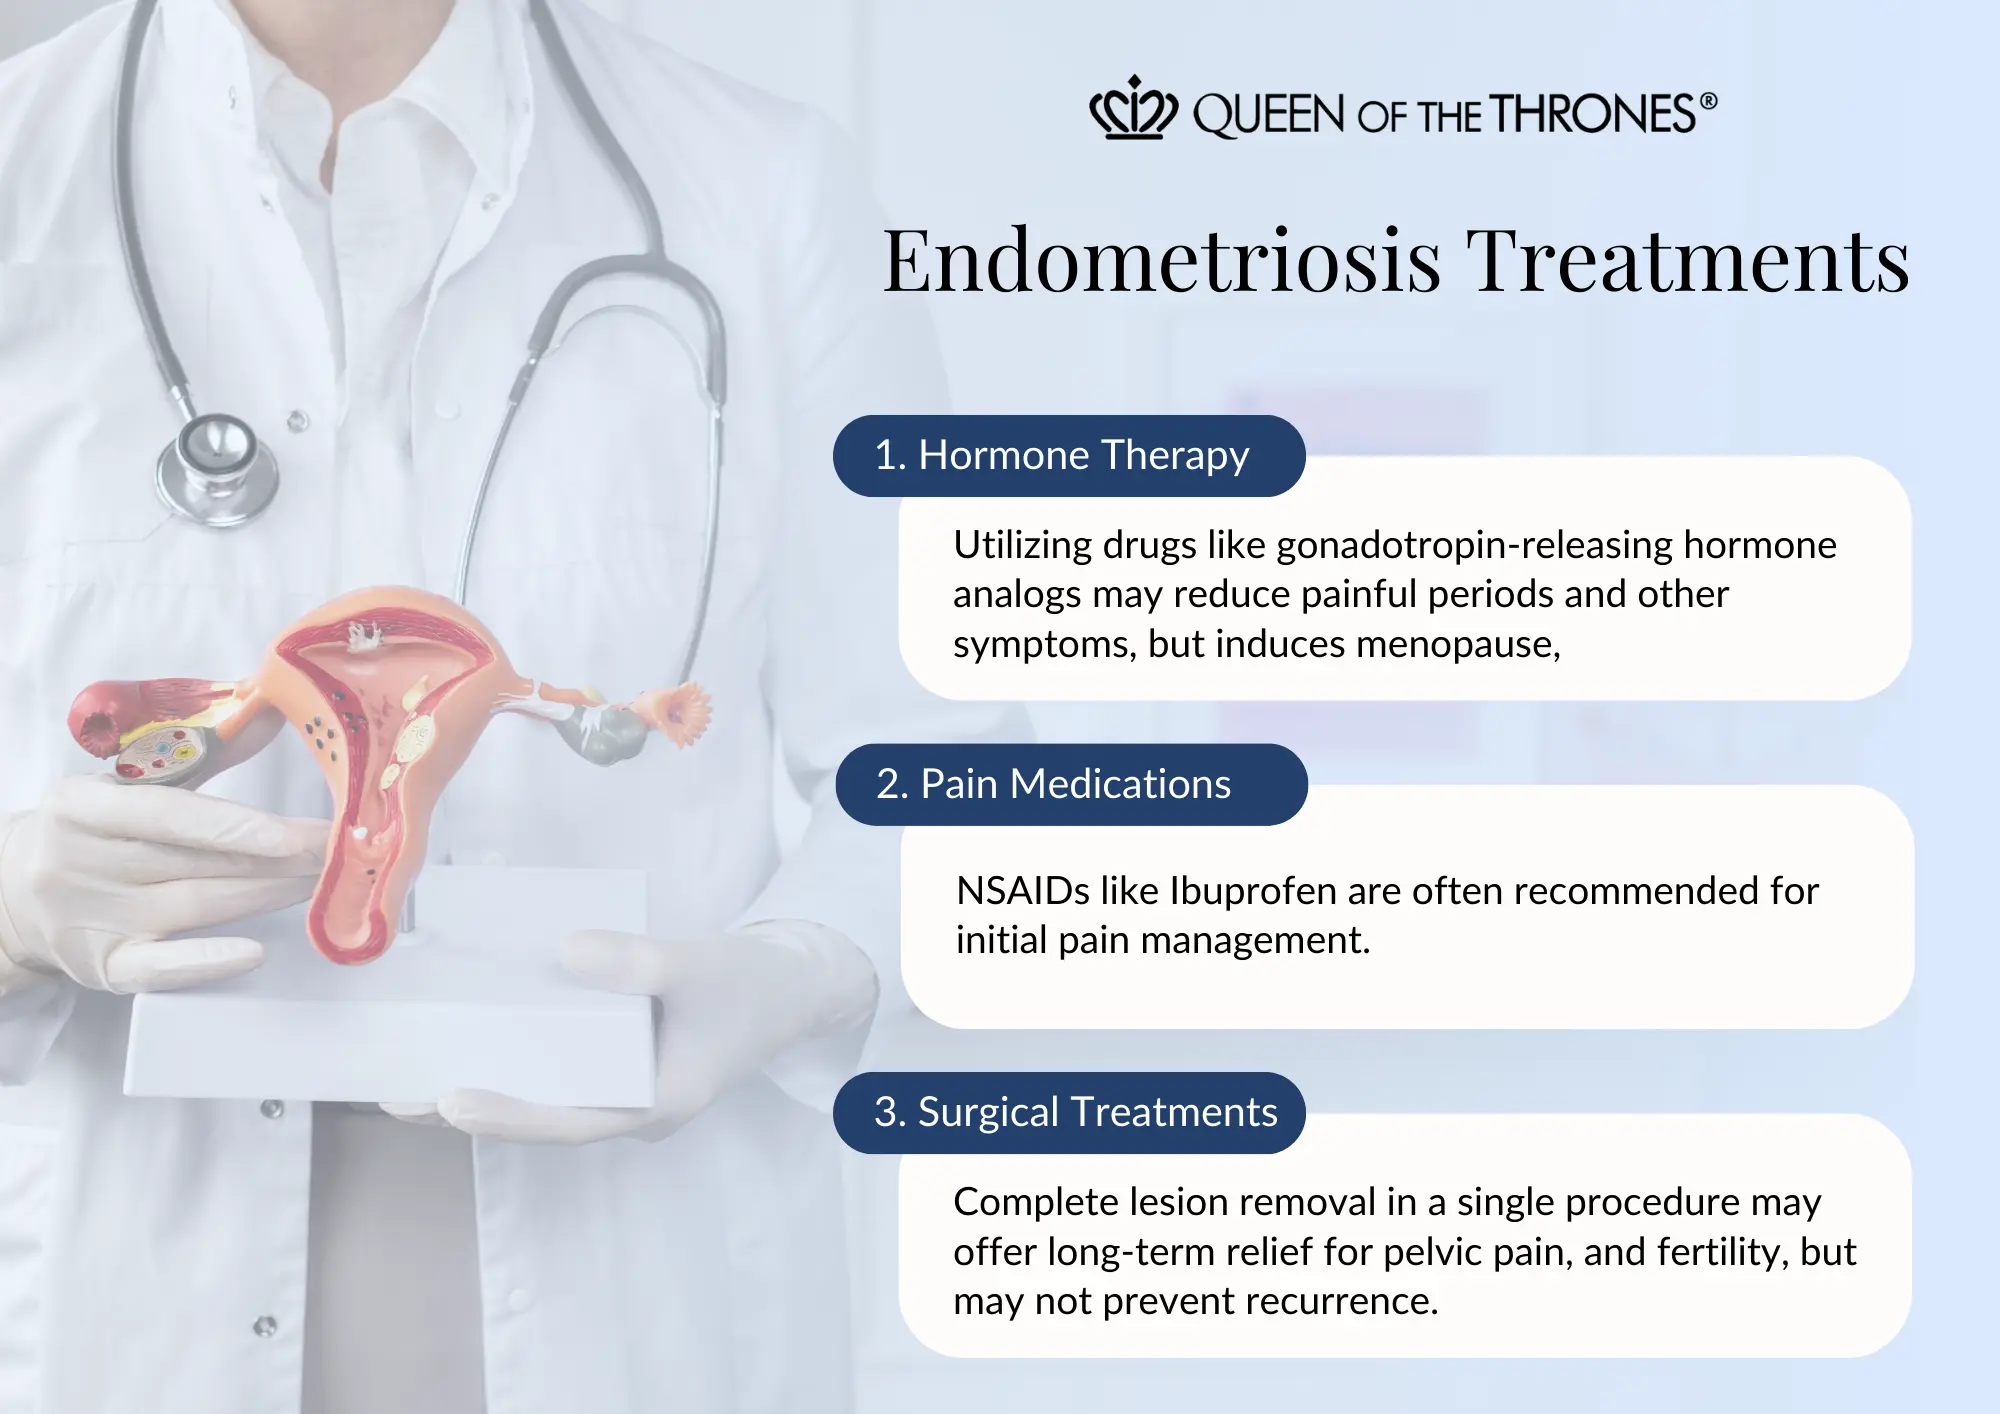 Endometriosis treatments by Queen of the Thrones